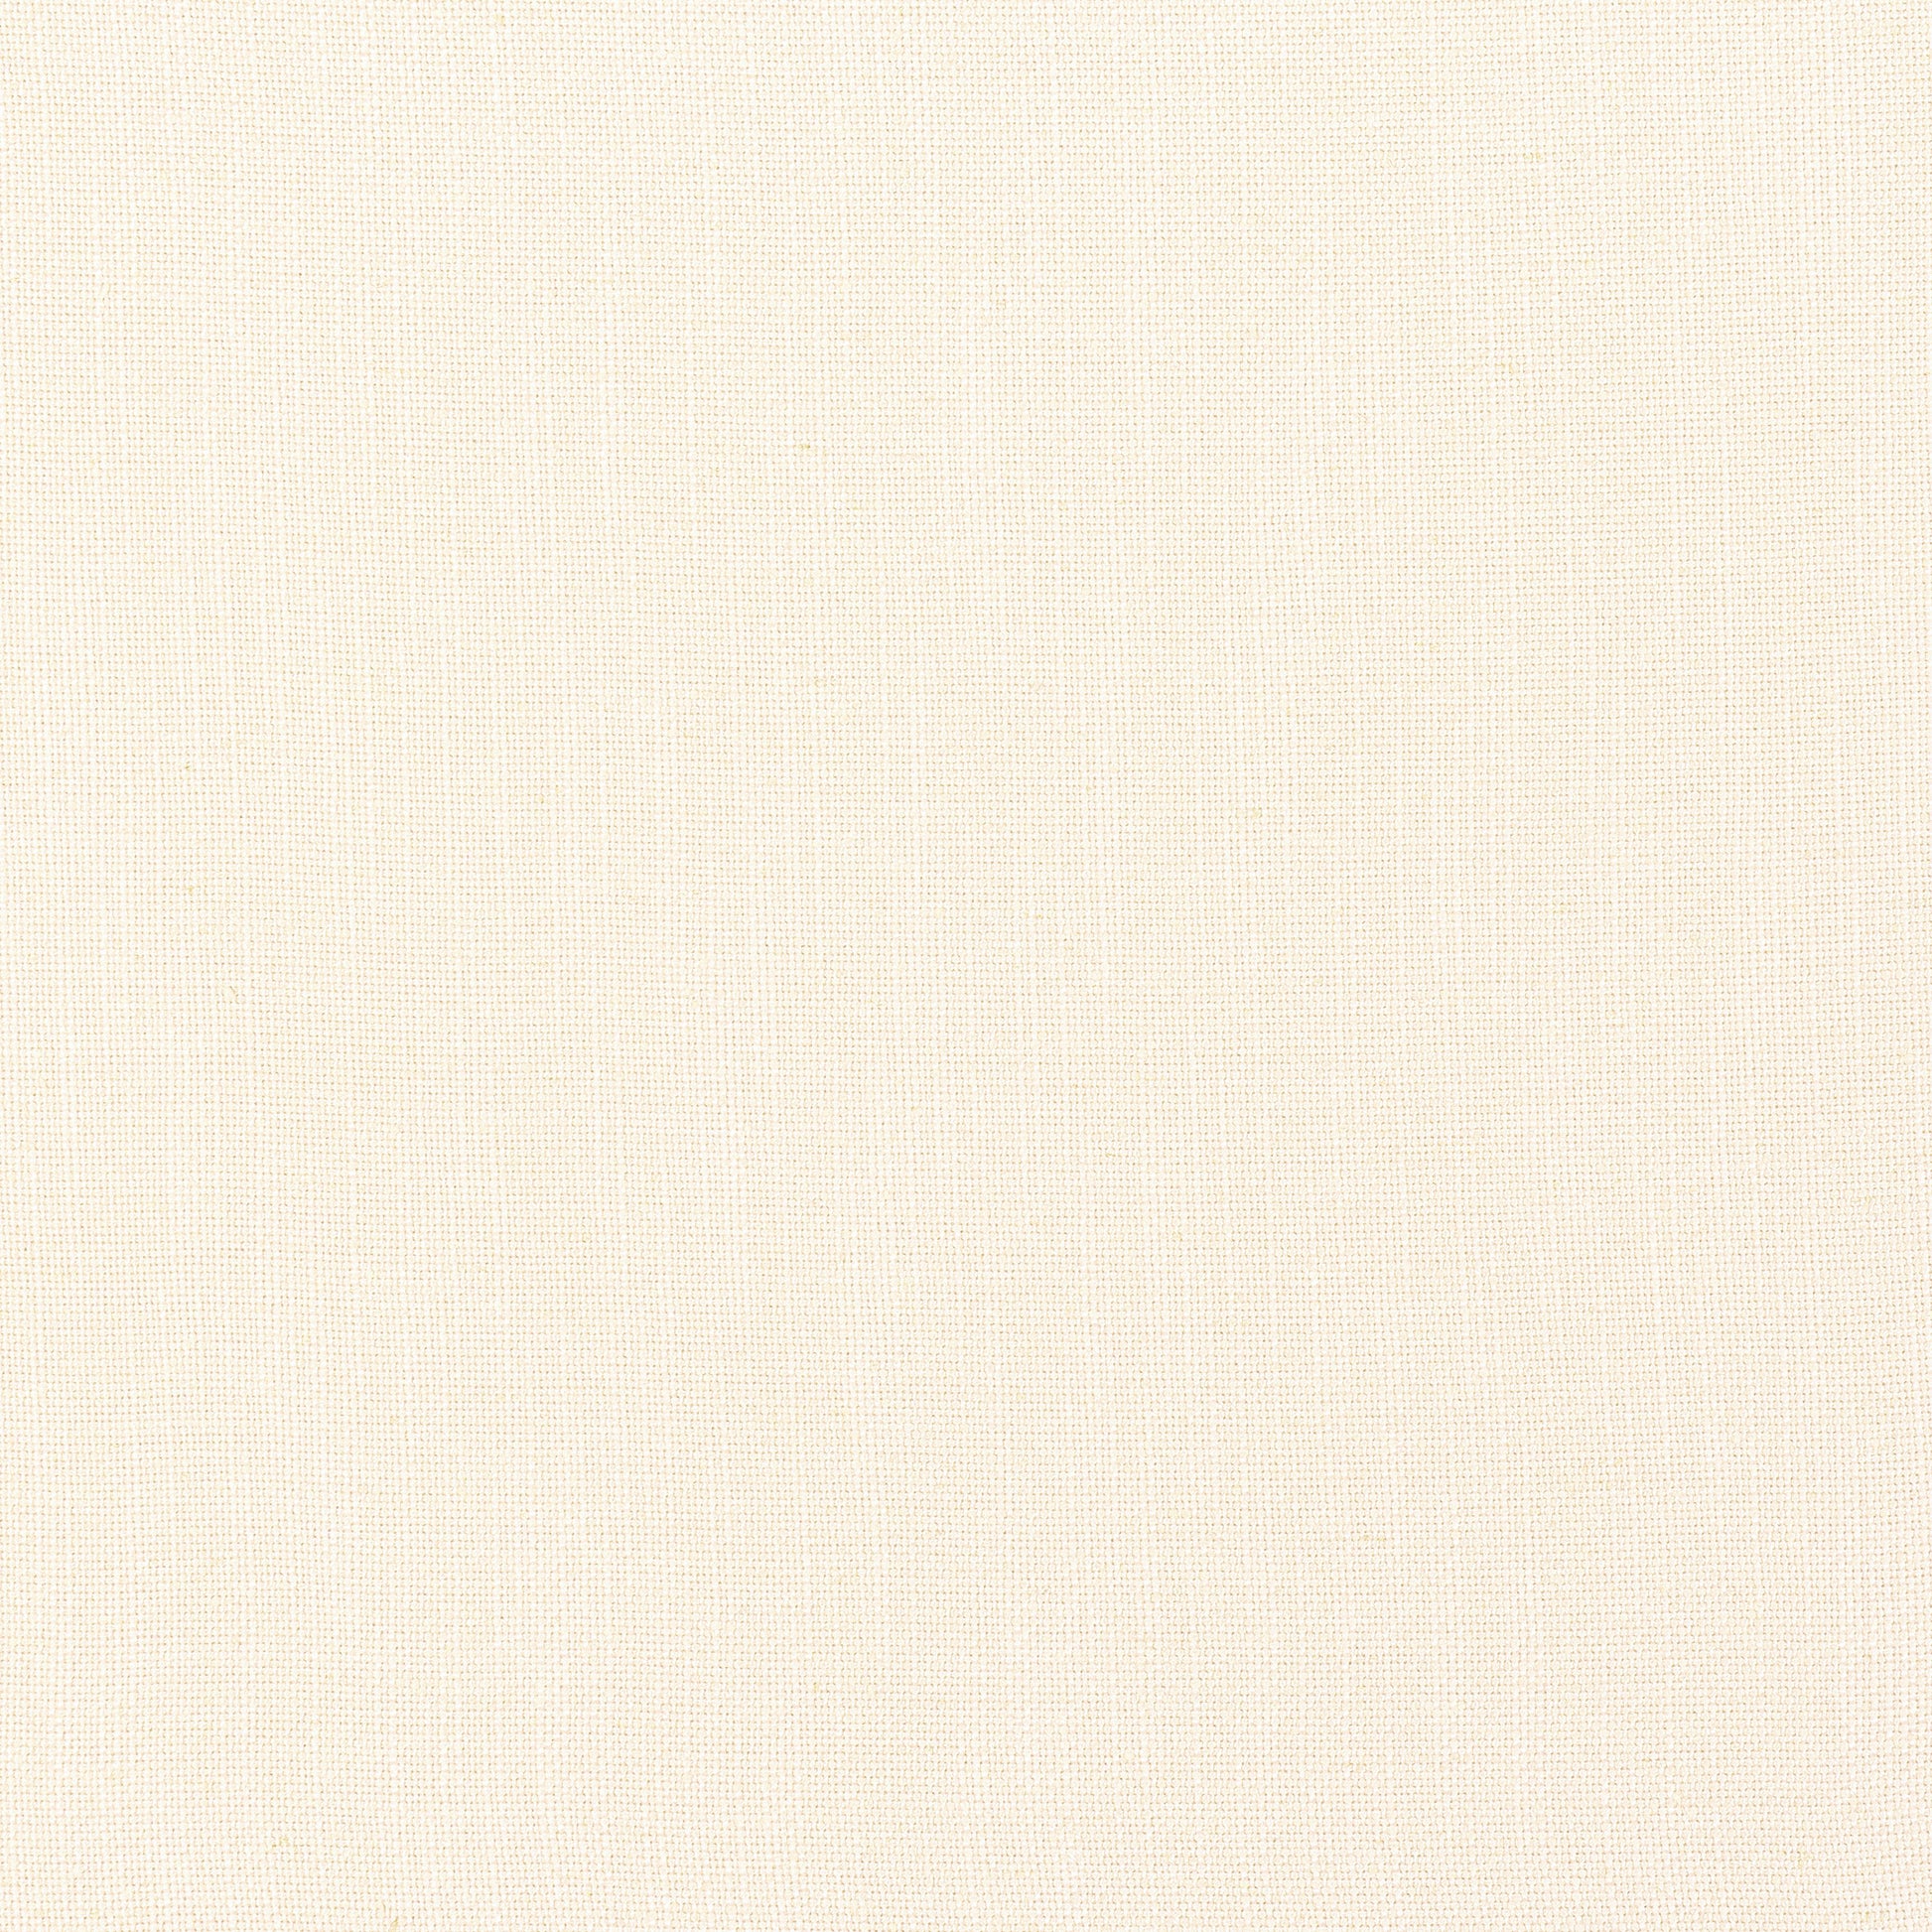 Purchase Thibaut Fabric Product FWW7625 pattern name Palisade Linen color Ivory